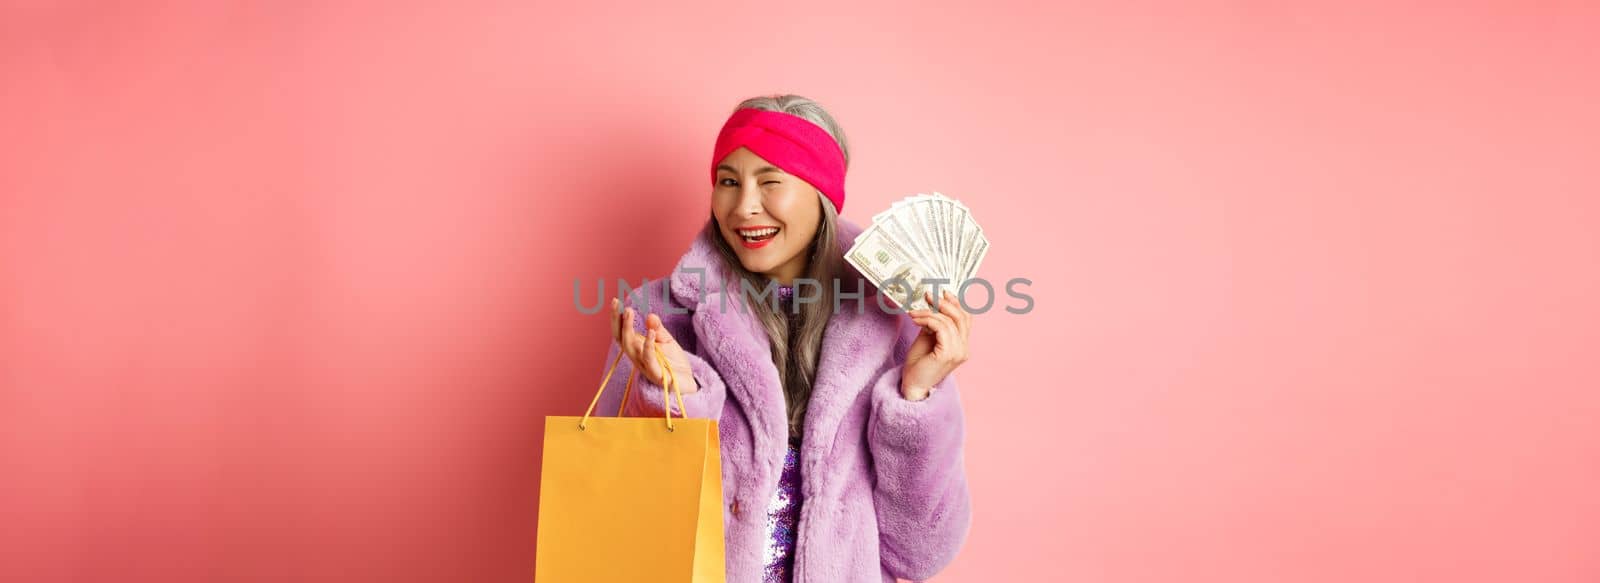 Rich and fashionable asian senior woman wasting money in shops, holding shopping bag and dollars, winking happy at camera, pink background.